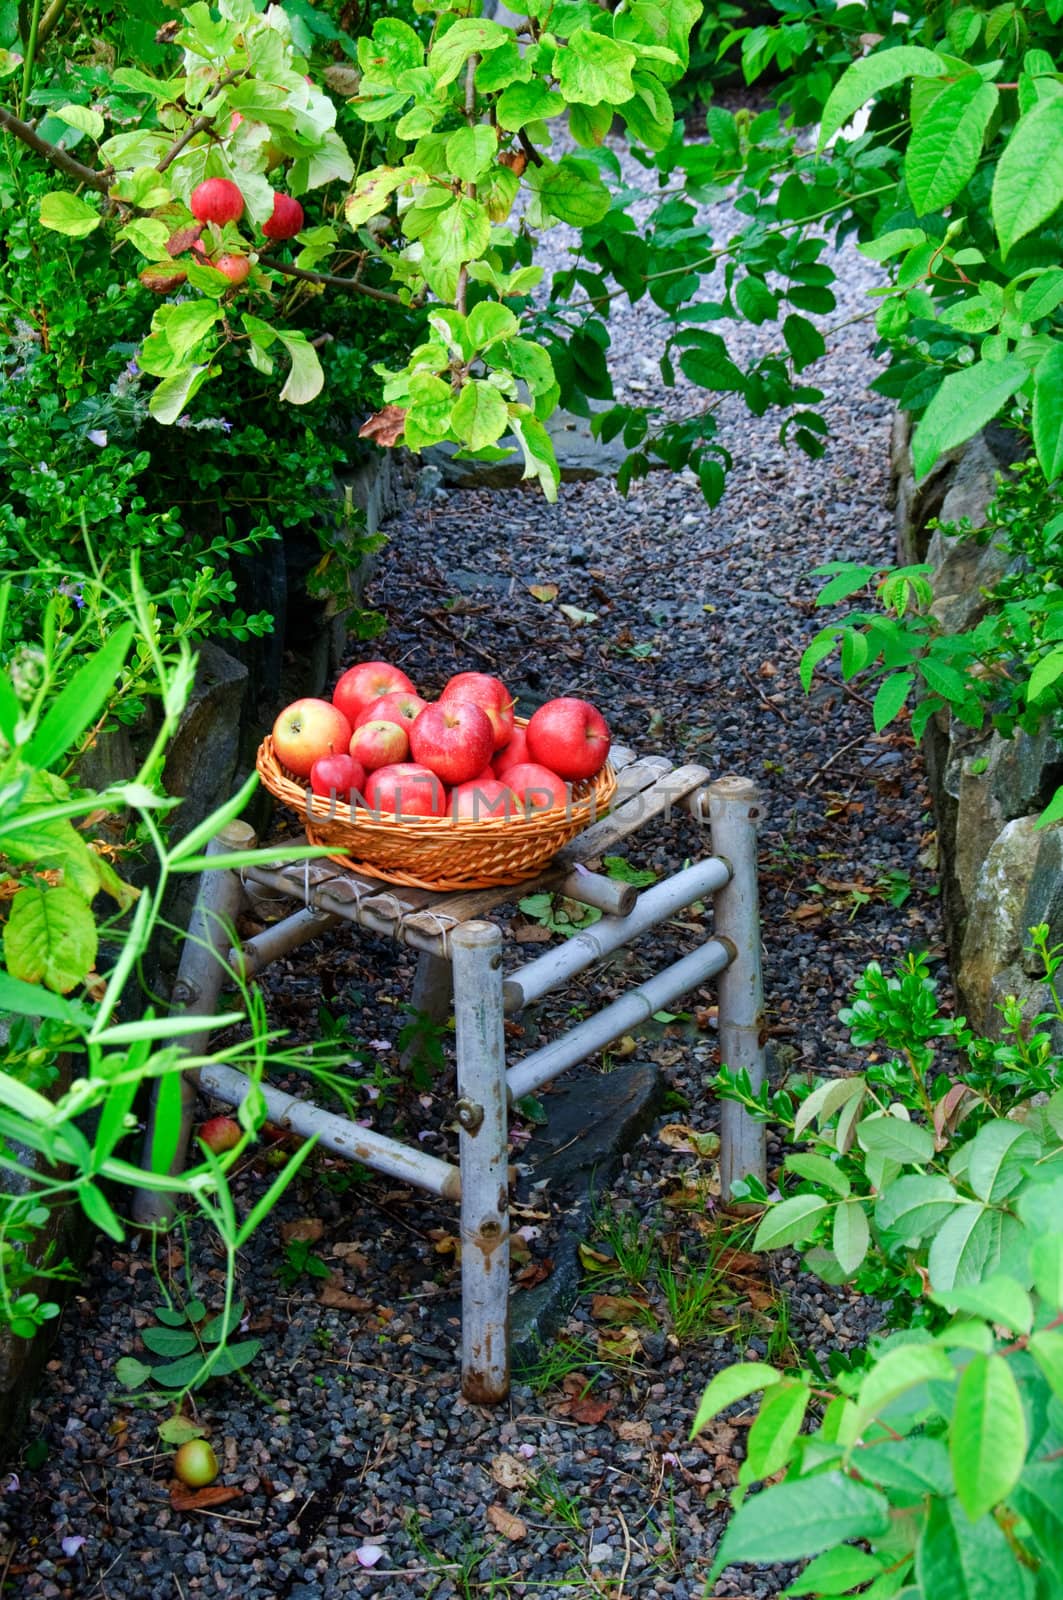 A basket of red apples in front of an apple tree in an overgrown garden